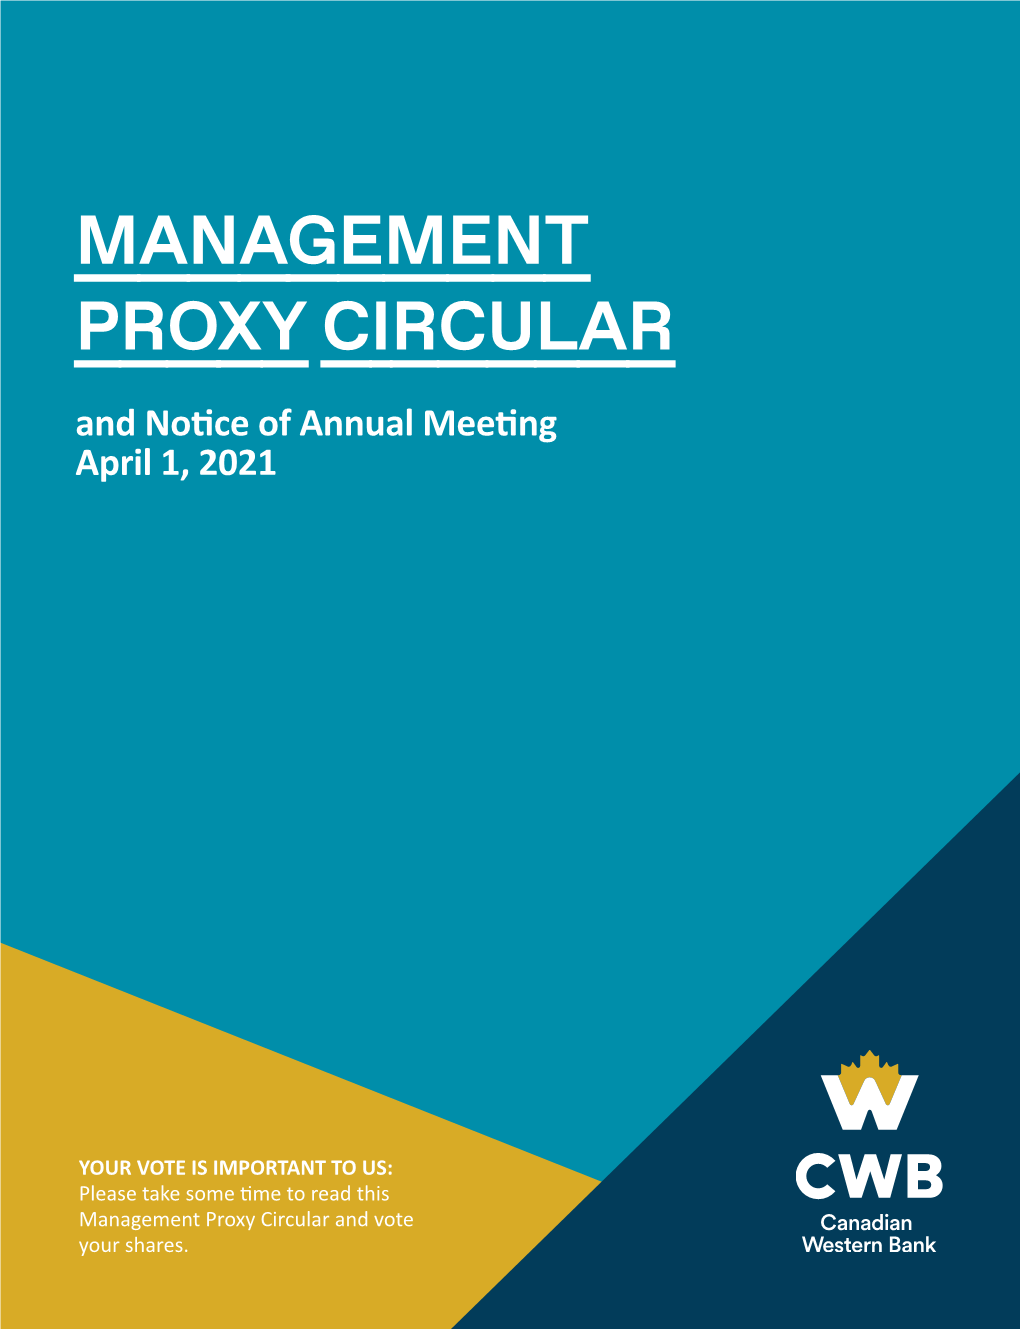 MANAGEMENT PROXY CIRCULAR and Notice of Annual Meeting April 1, 2021